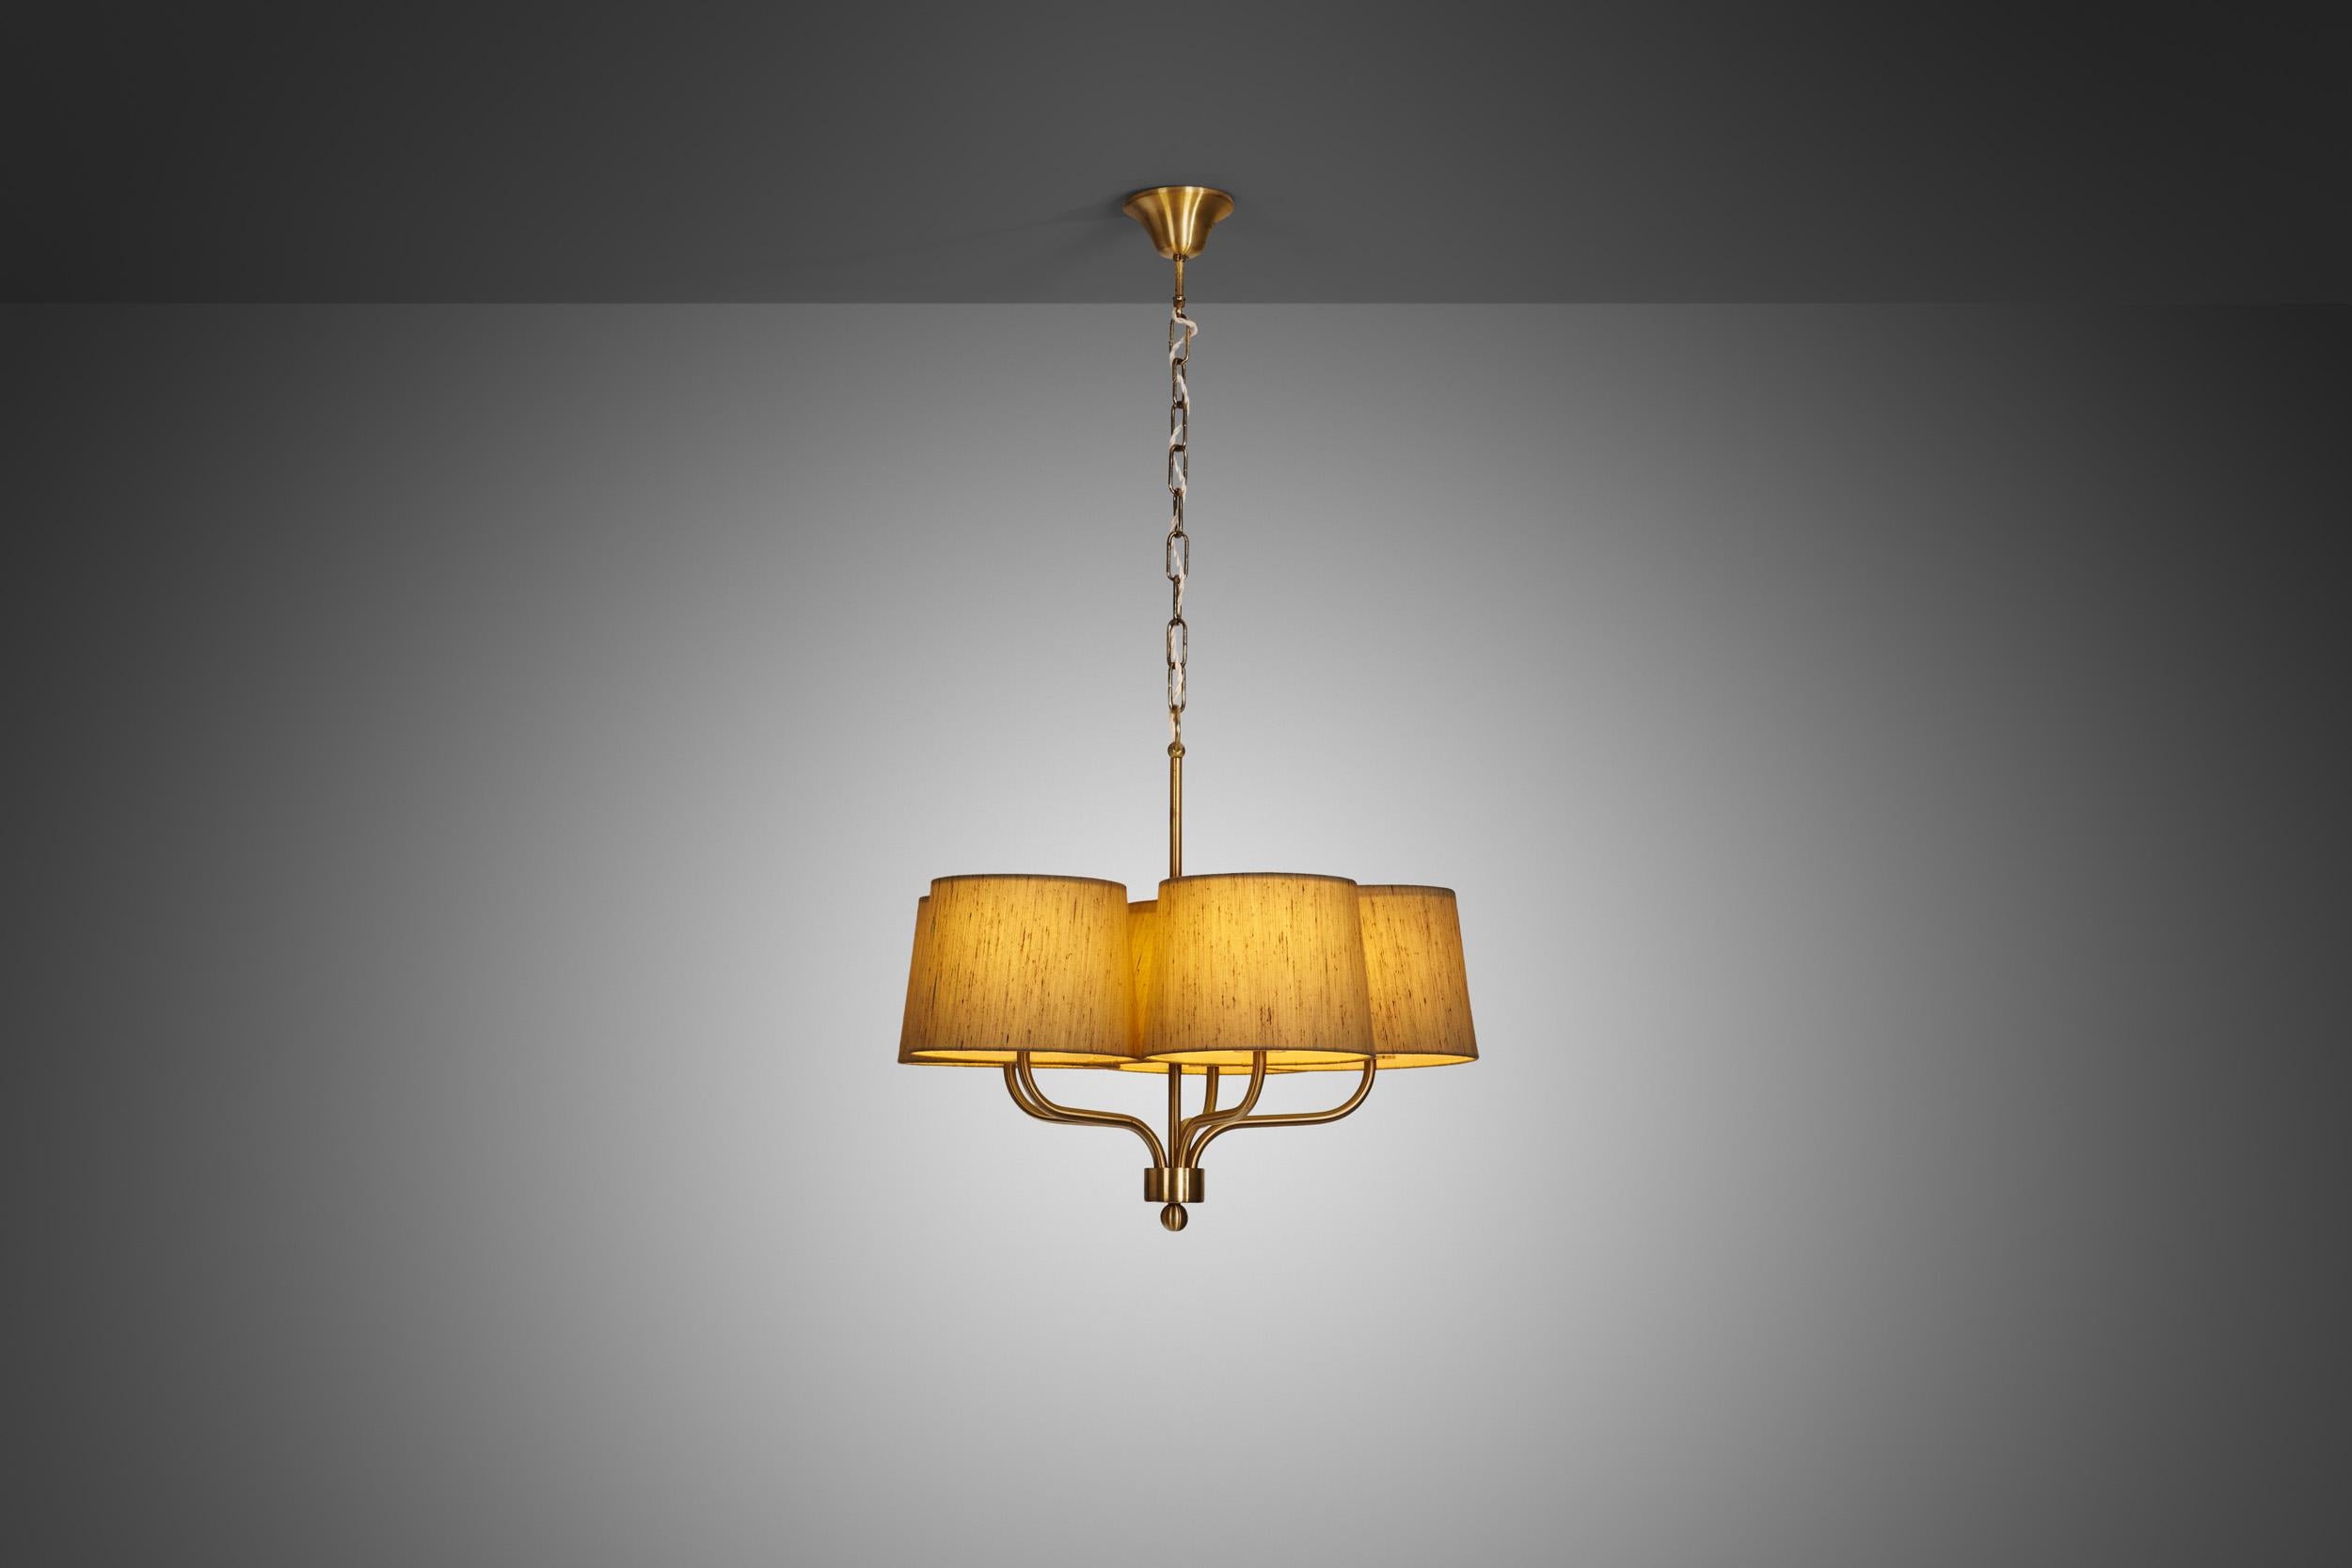 Mid-20th Century Five Arm Brass Ceiling Lamp with Fabric Shades by Luxus Vittsjö, Sweden 1960s For Sale